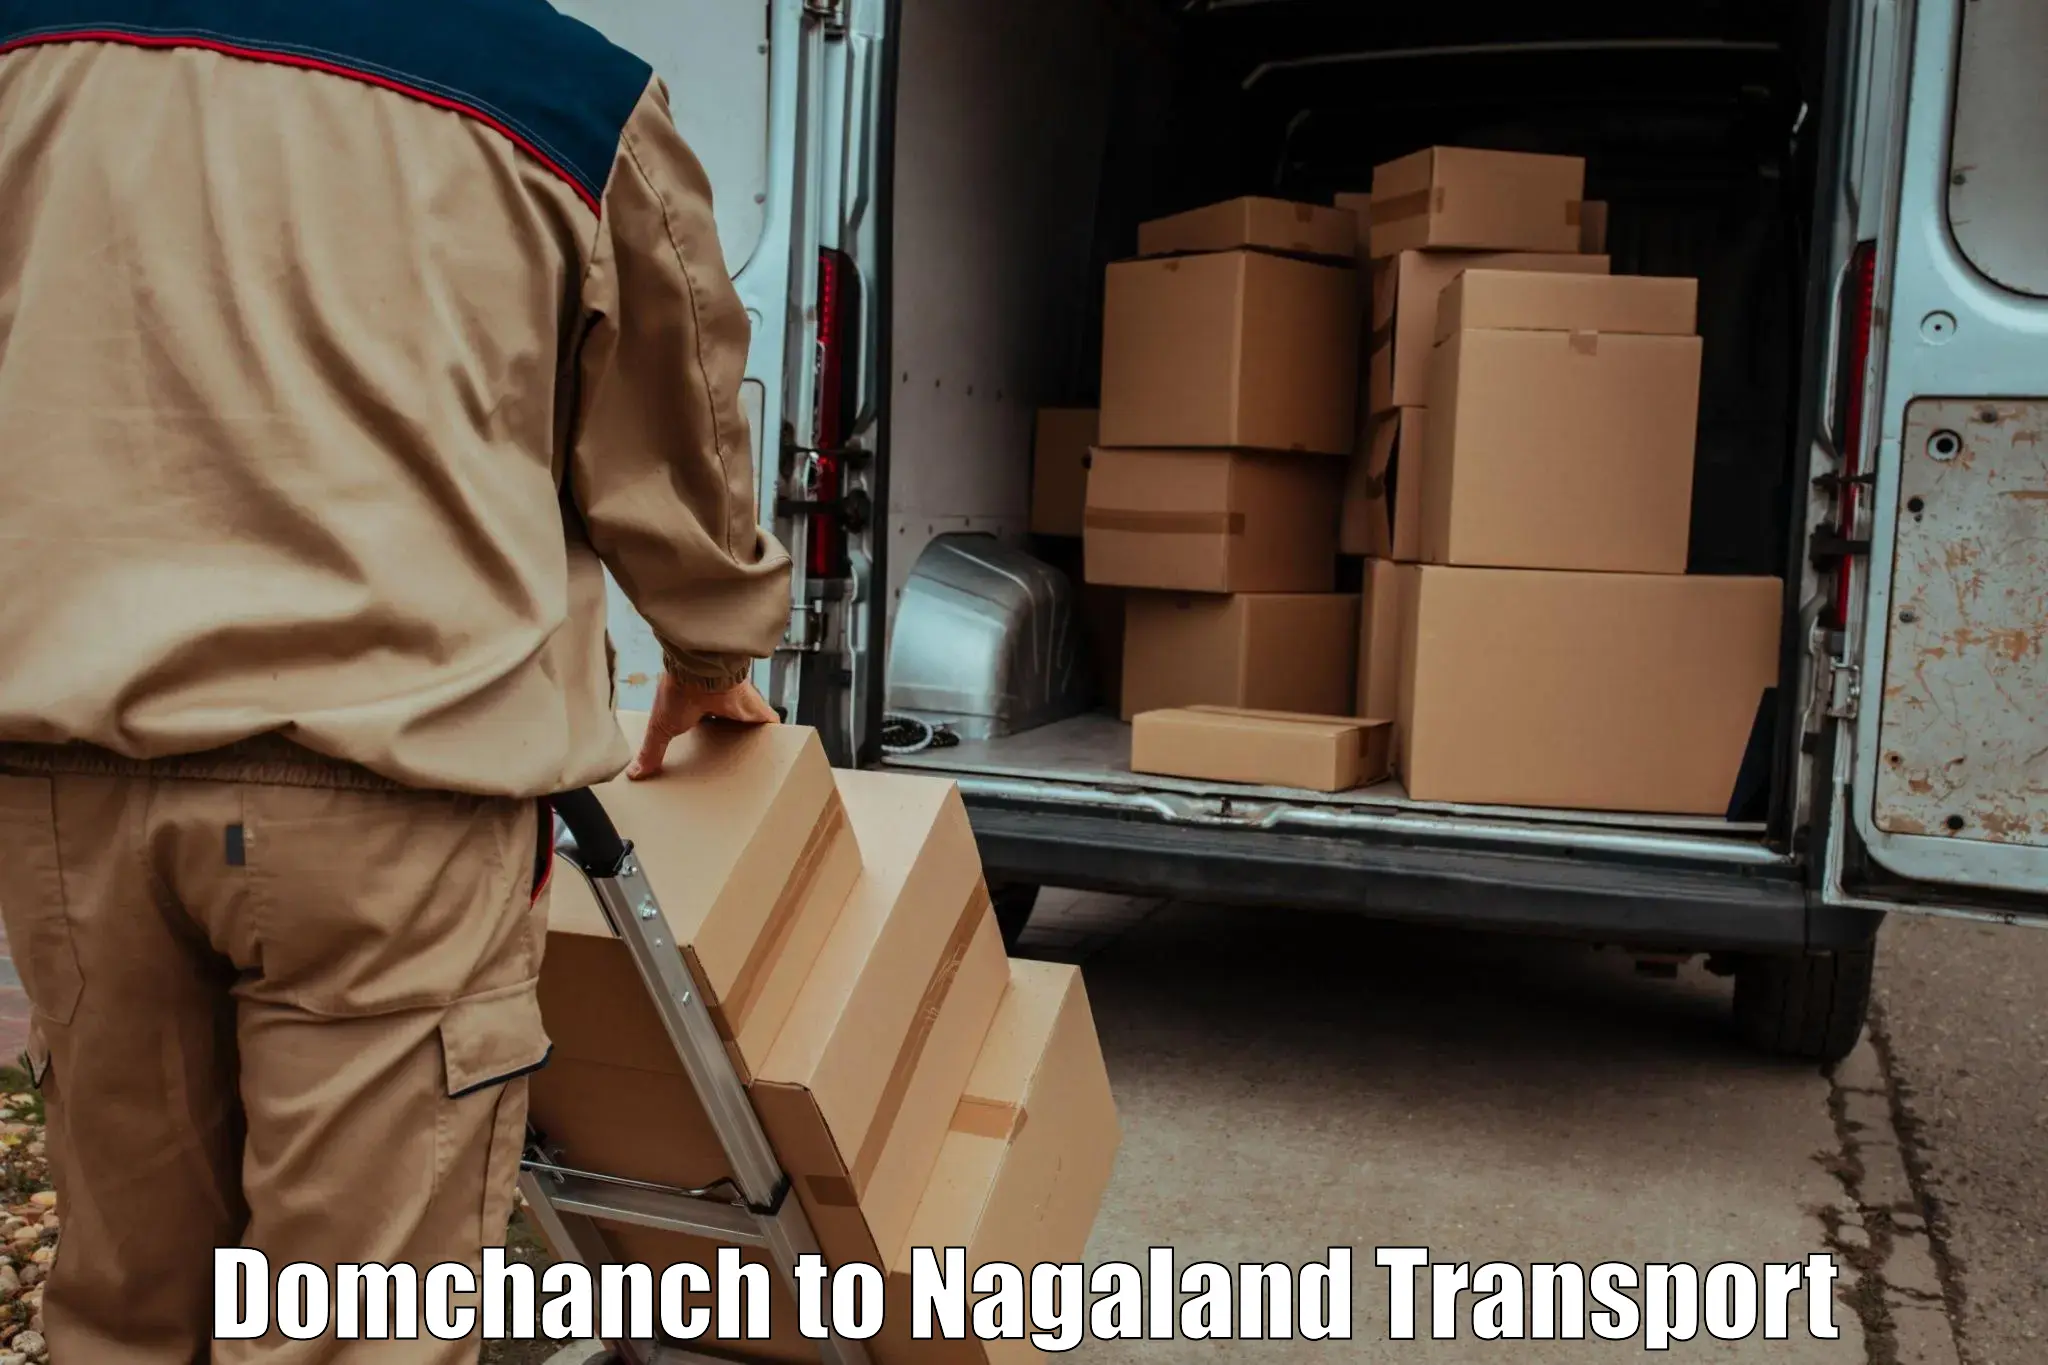 Nationwide transport services Domchanch to NIT Nagaland